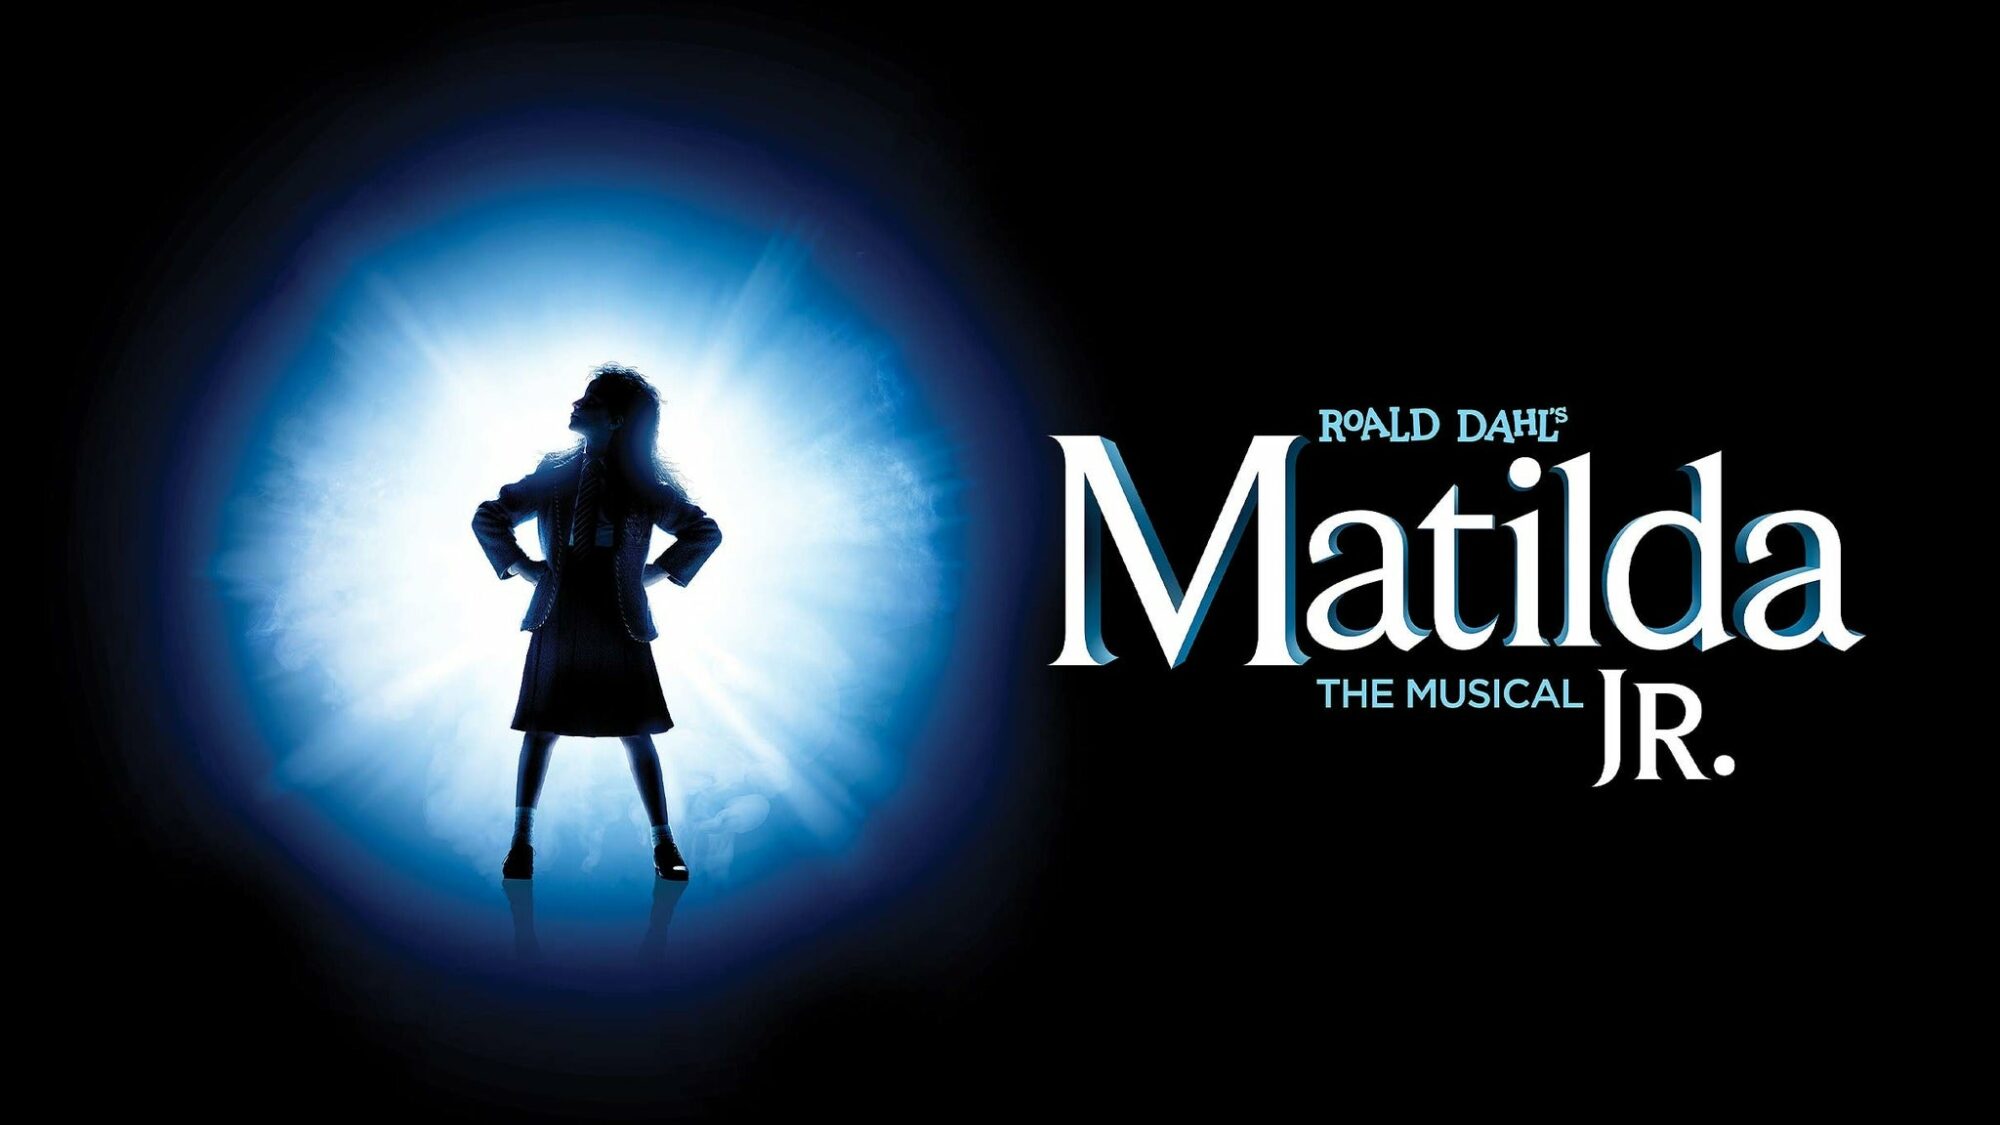 Image name Matilda Jr The Musical at Whitby Pavilion Theatre Whitby the 28 image from the post Events in Yorkshire.com.